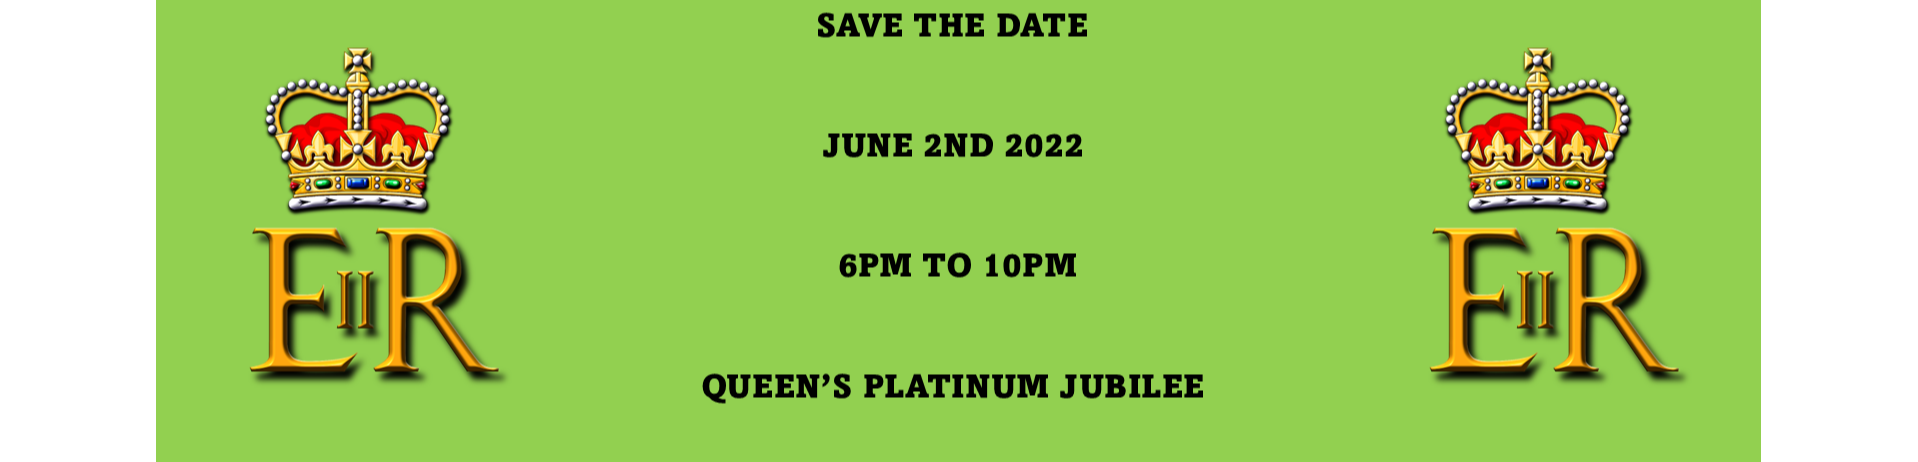 Save the Date Queen's Platinum Jubilee June 2nd 2022